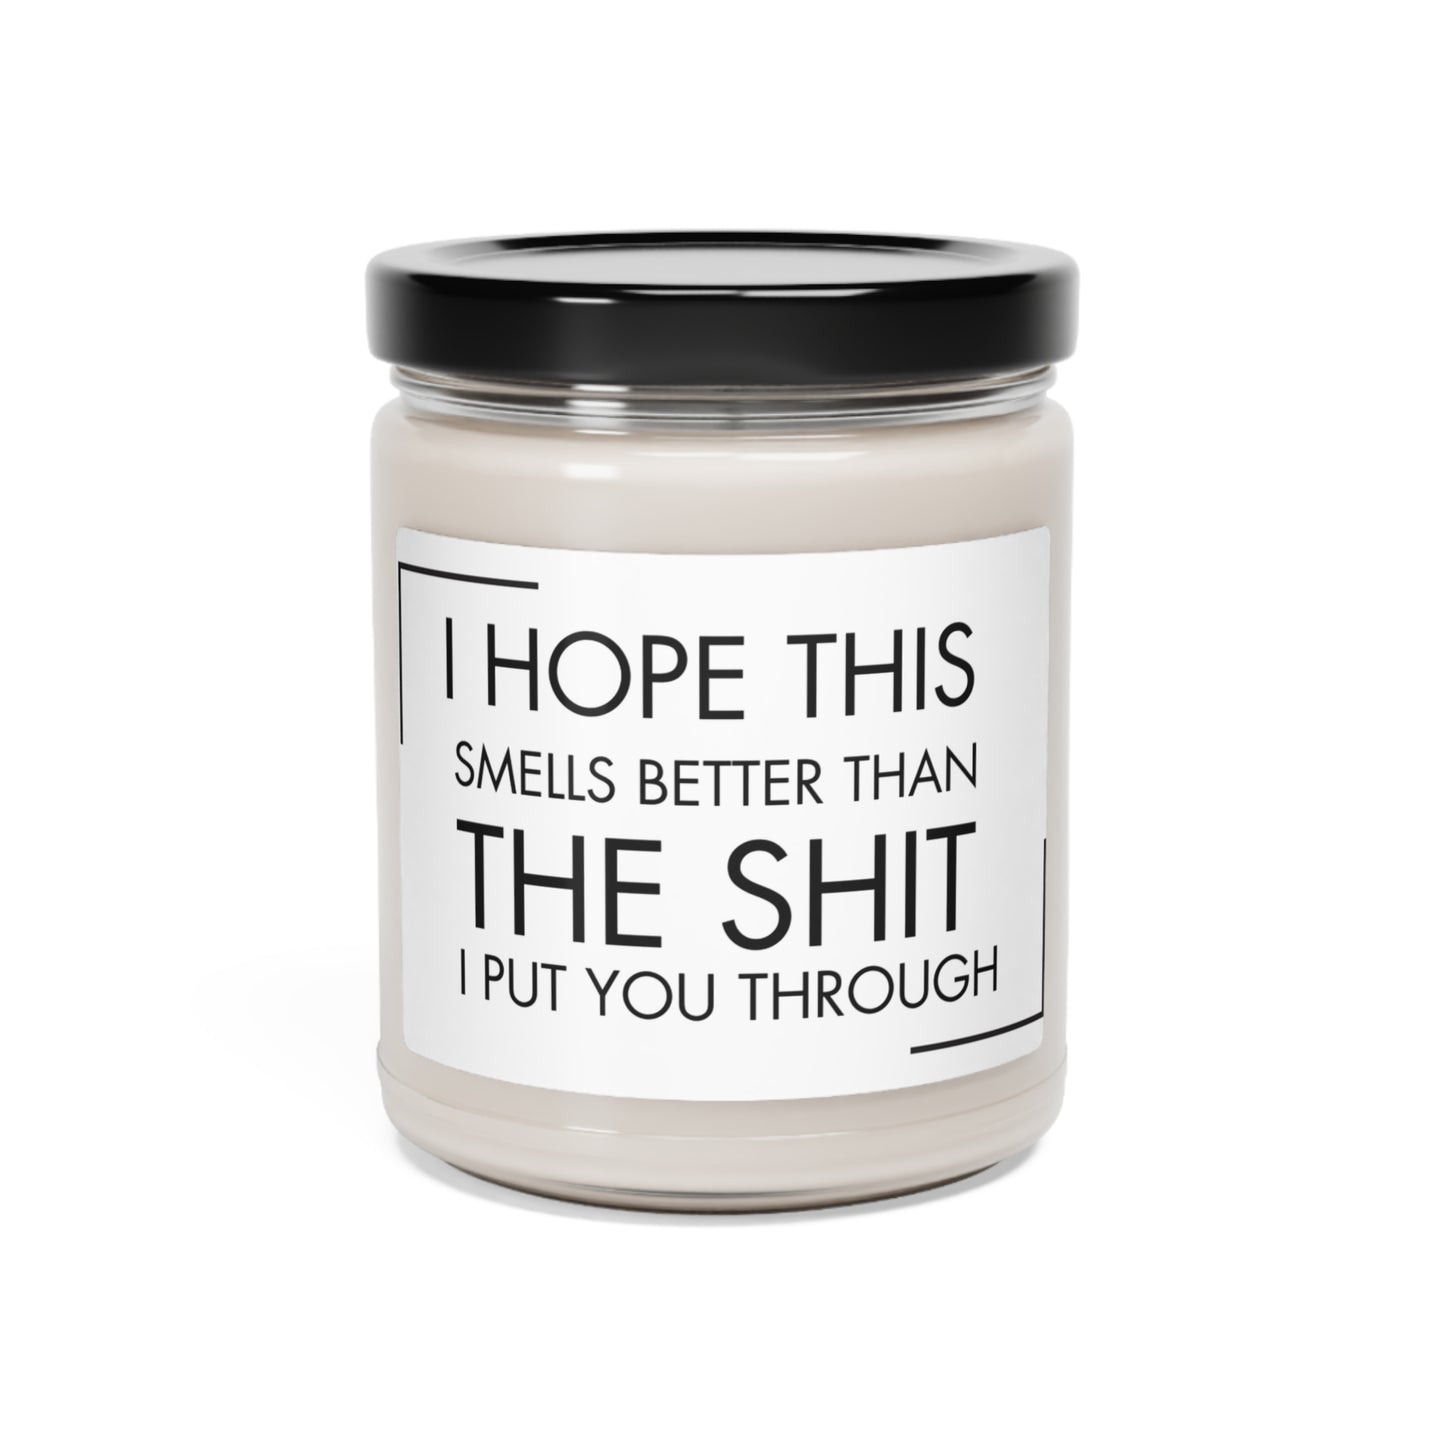 Scented Soy Candle, 9oz. Hope this smells better than the shit I put you through